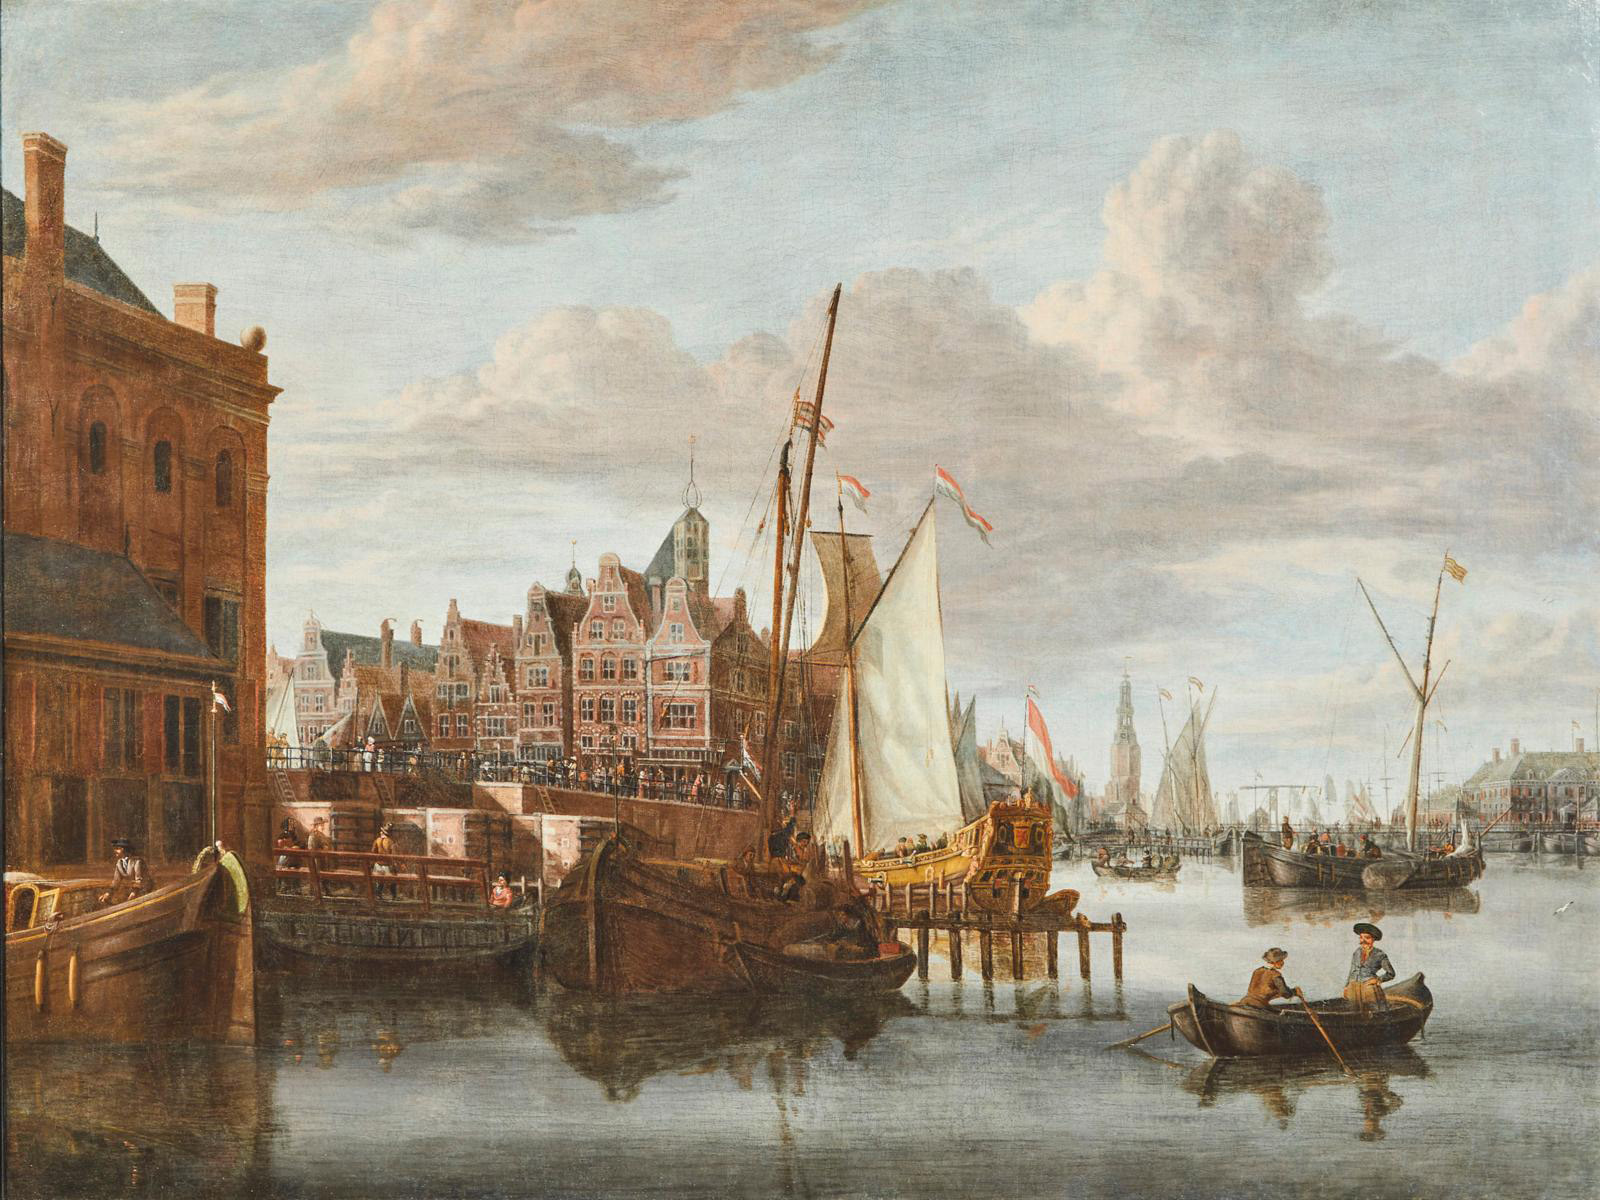 Storck, an Amsterdam Painter of the Dutch Golden Age